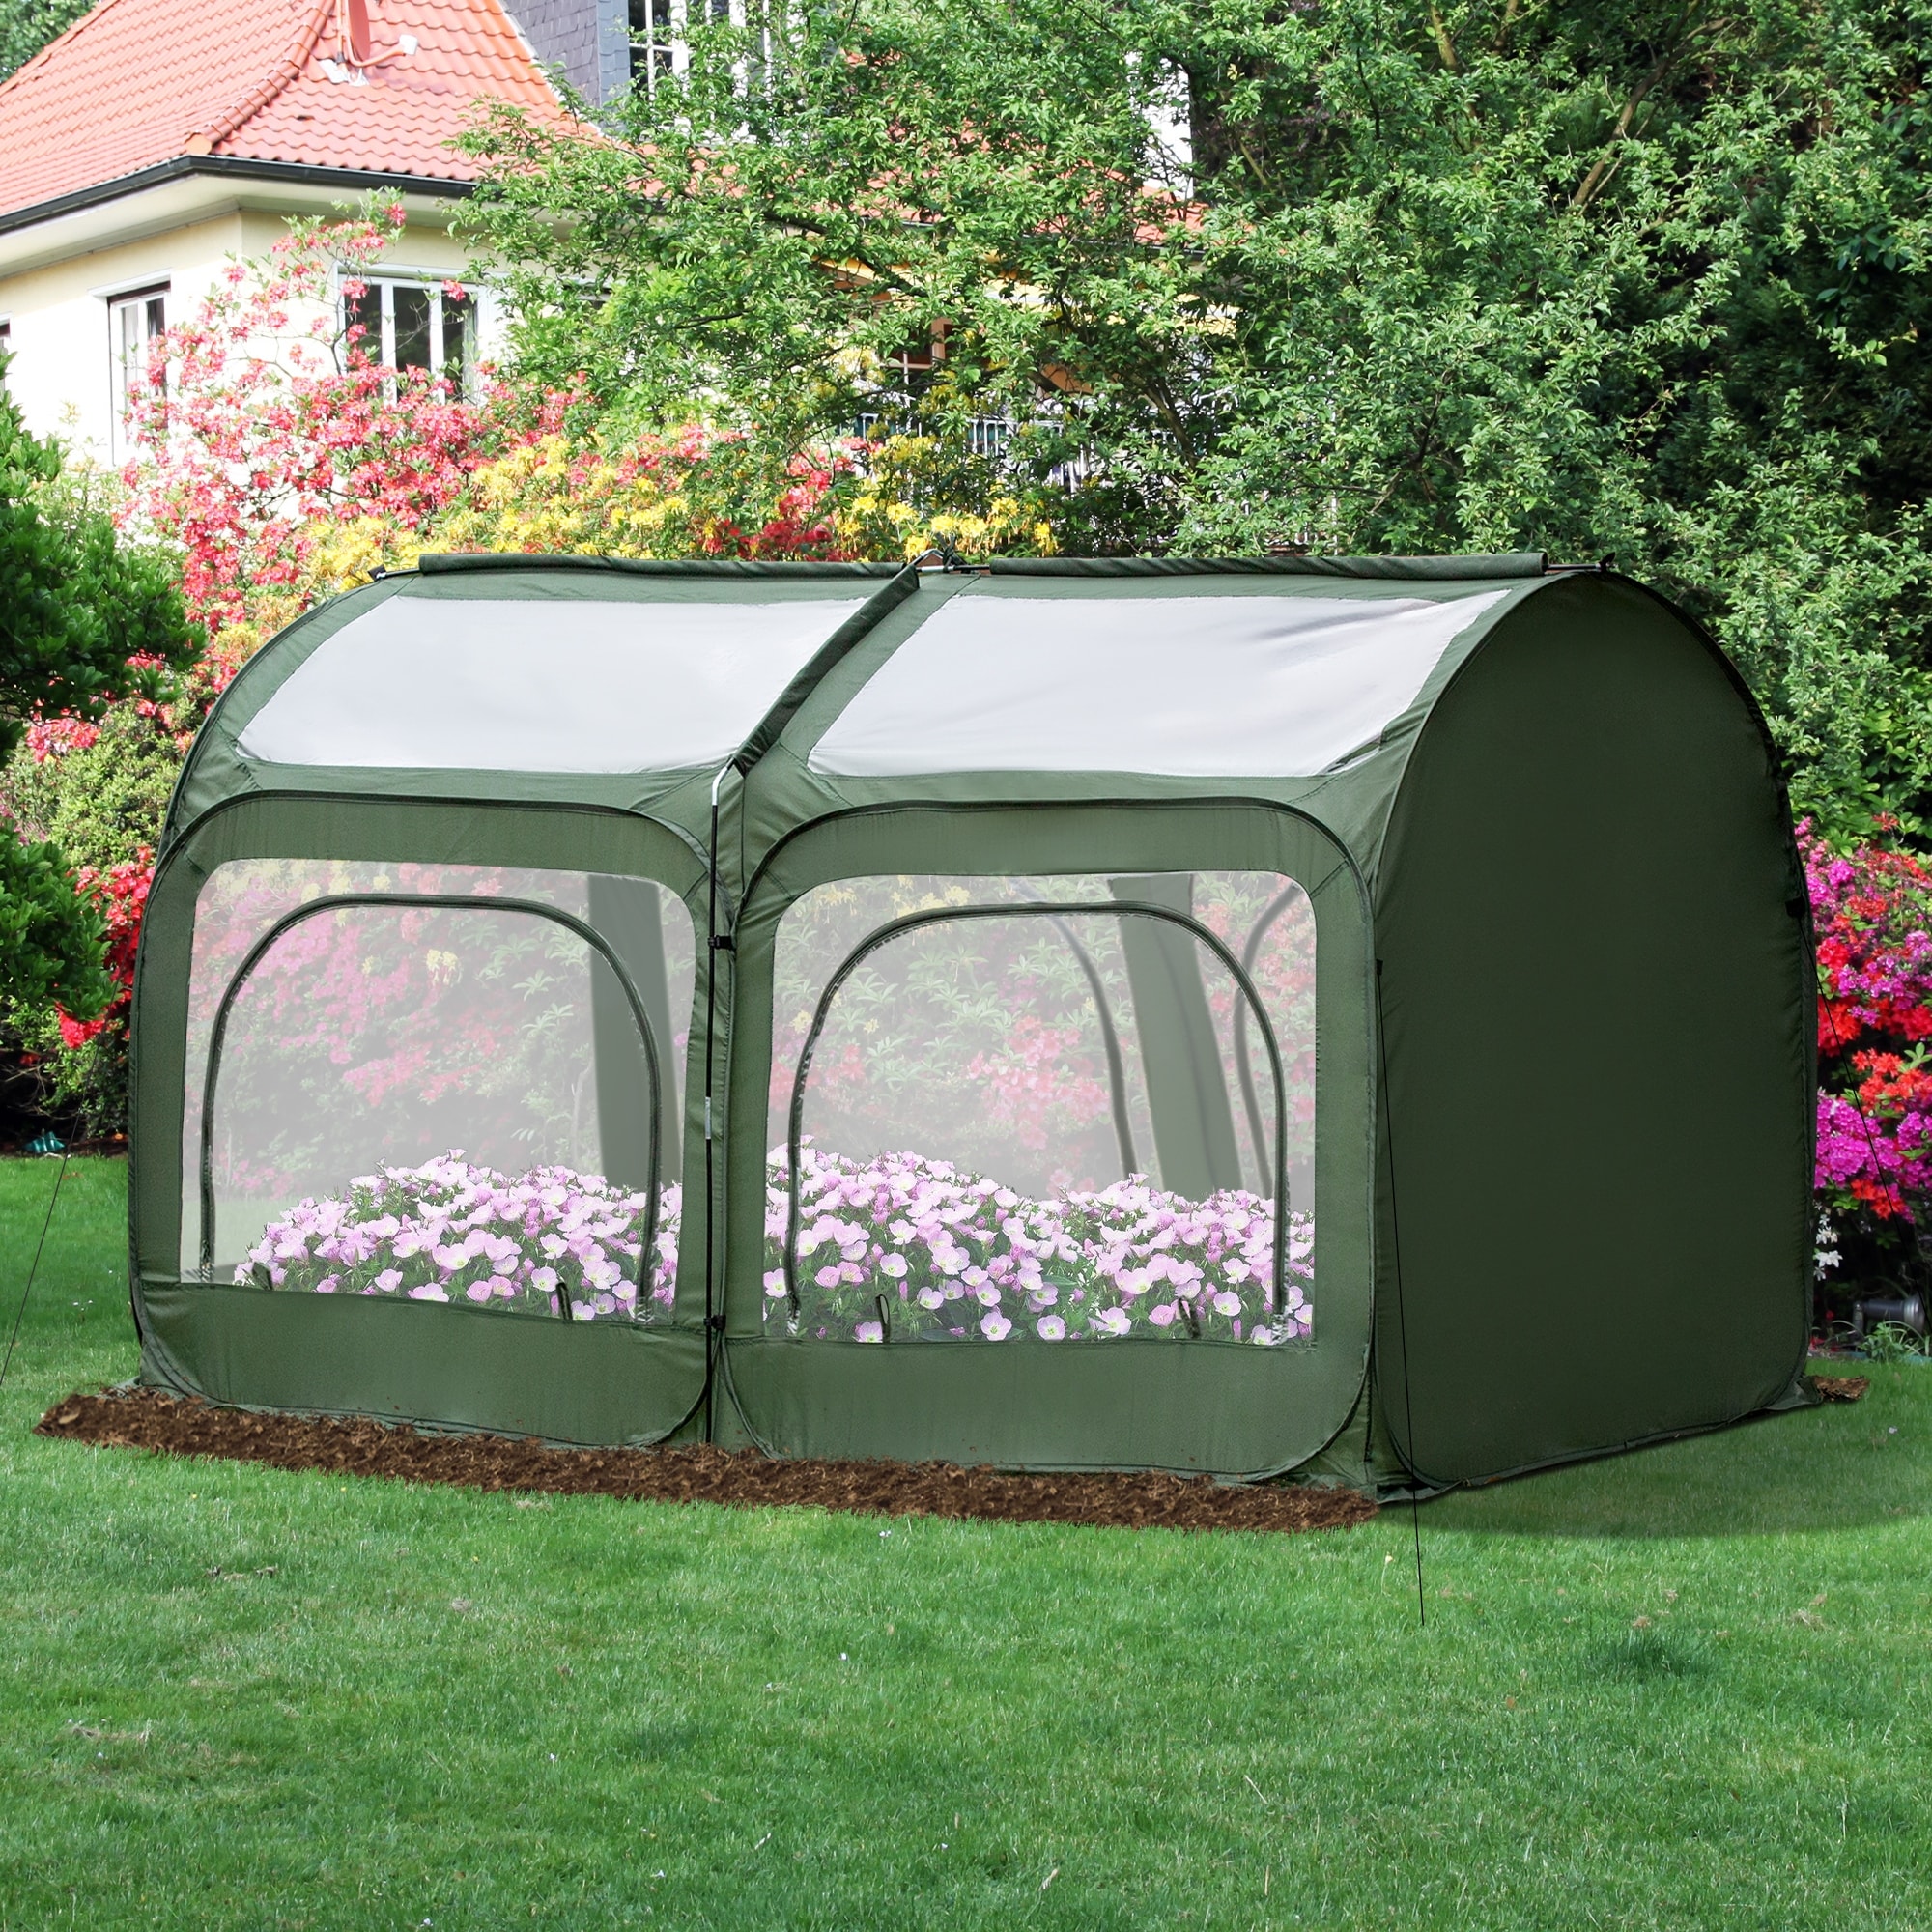 Portable Greenhouses: A Convenient Solution for Cultivating Your Own Green Space